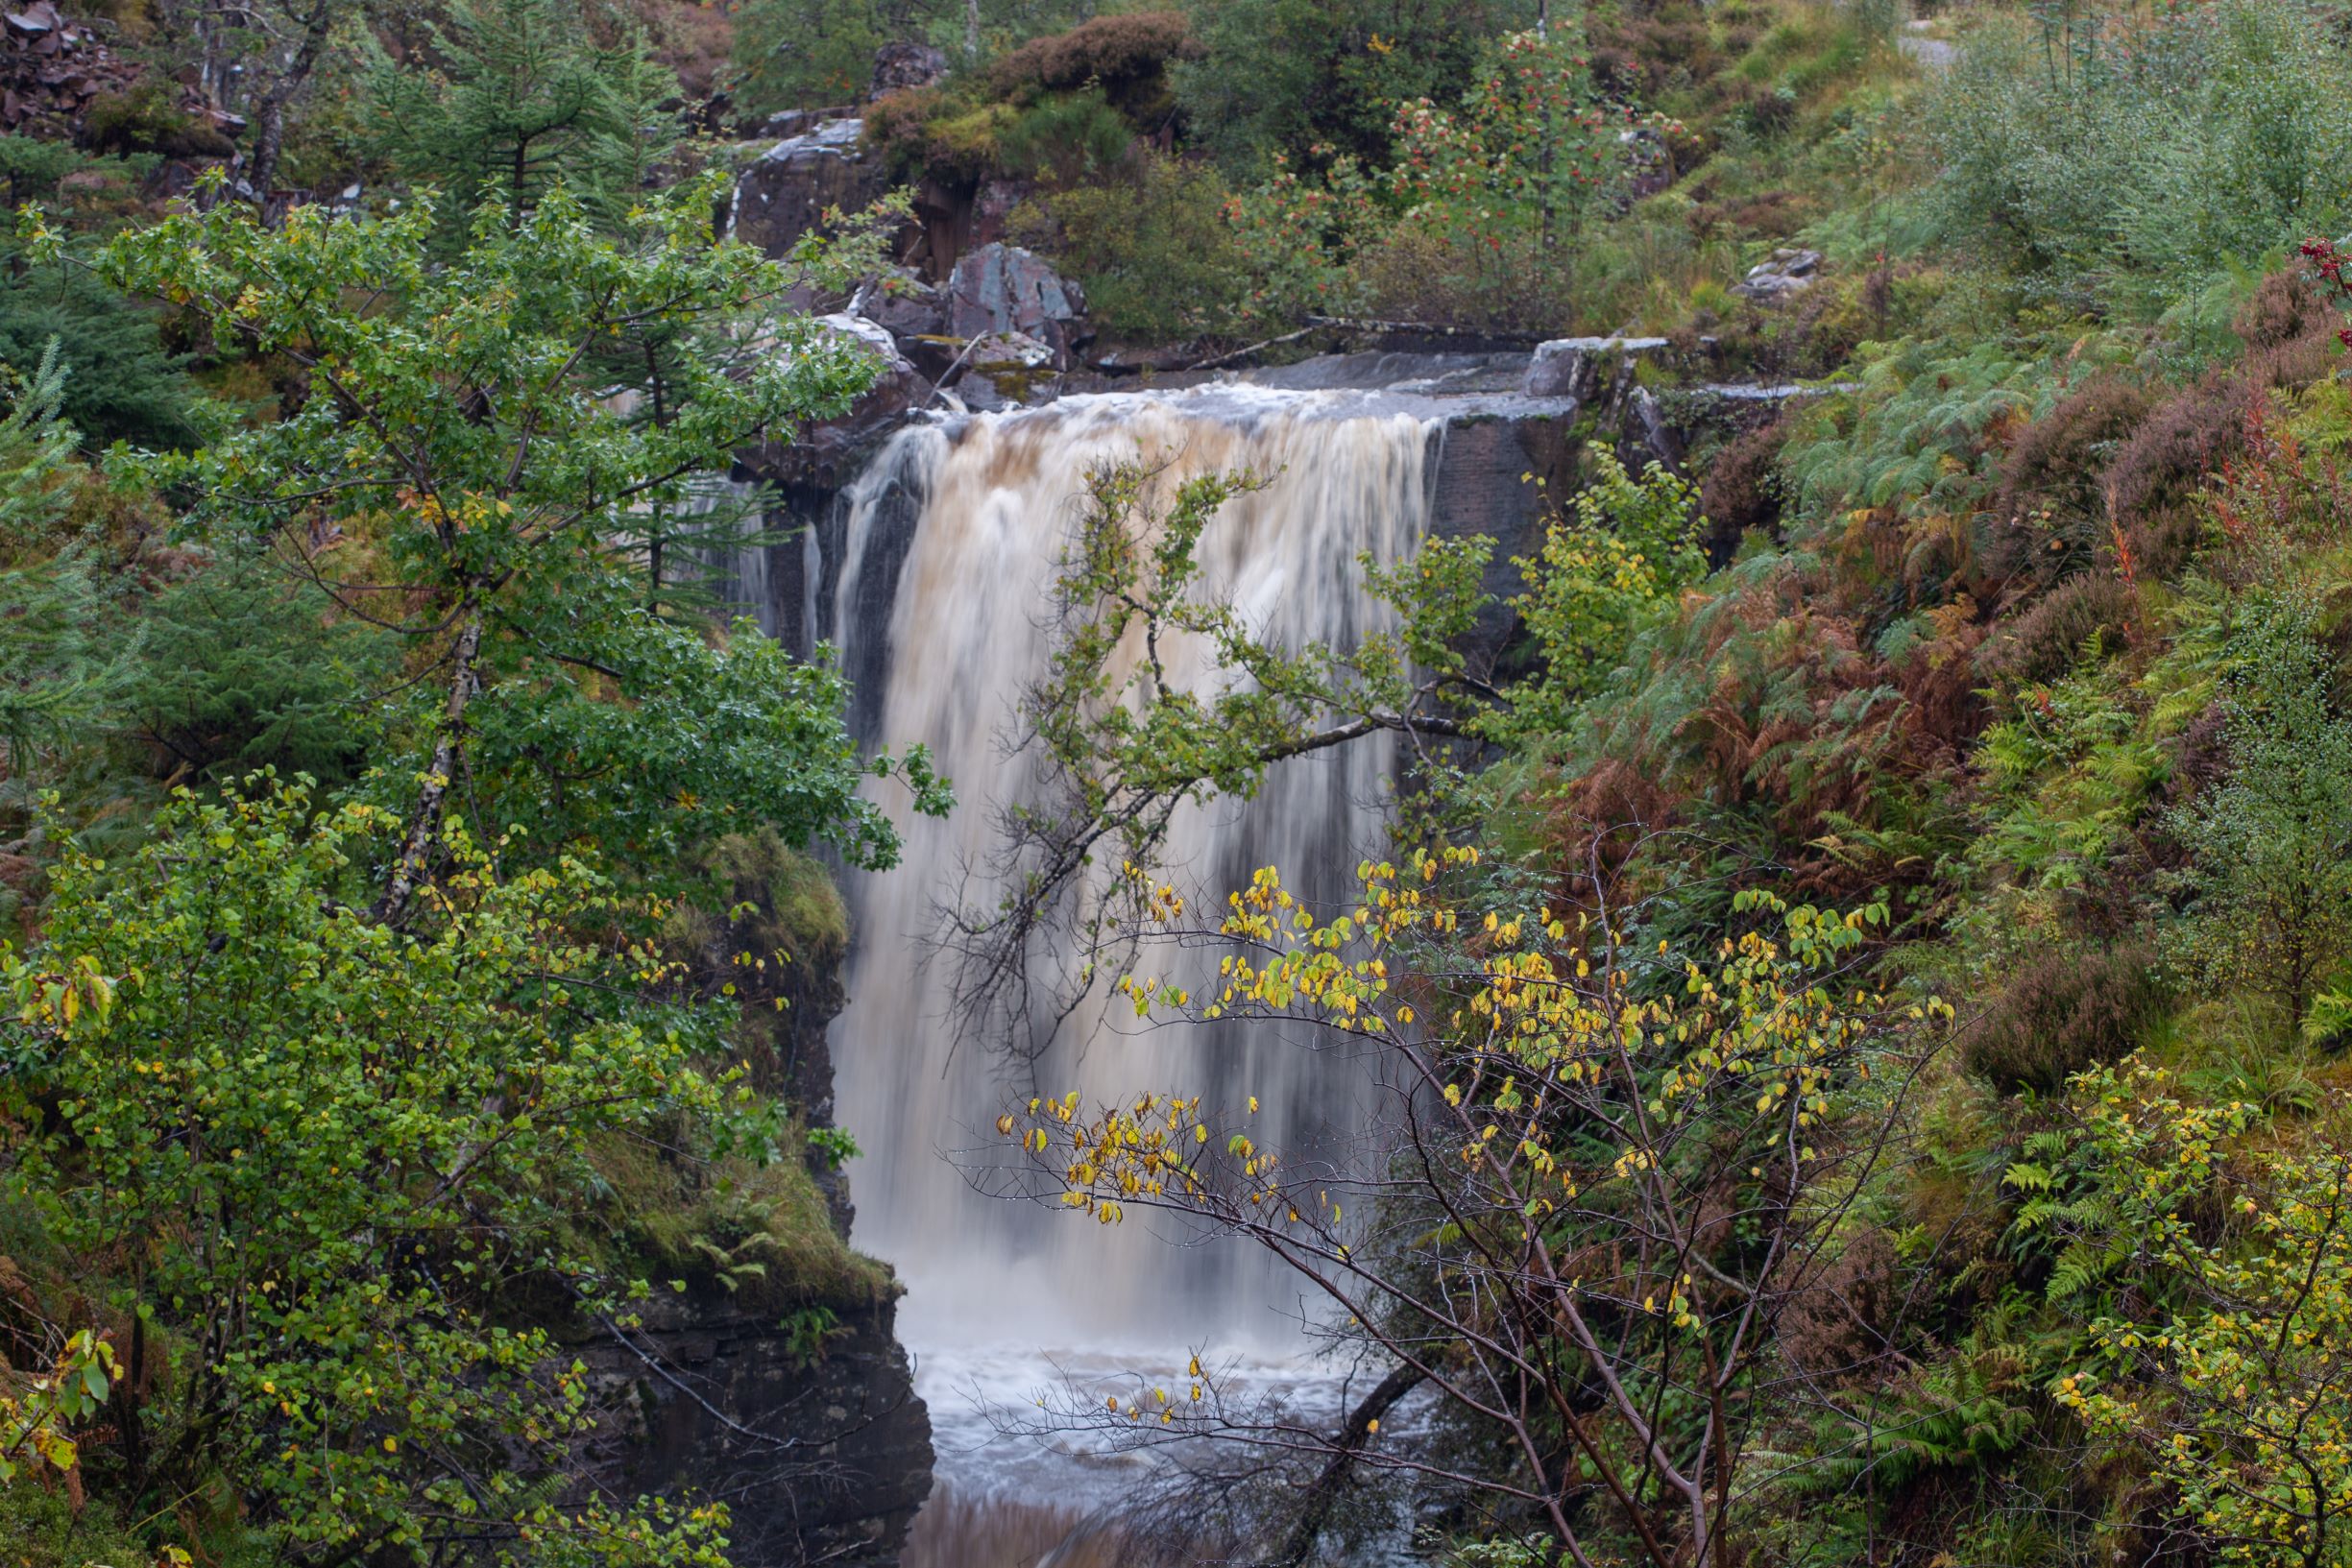 A high waterfall crashing into a river surrounded by trees at Slattadale